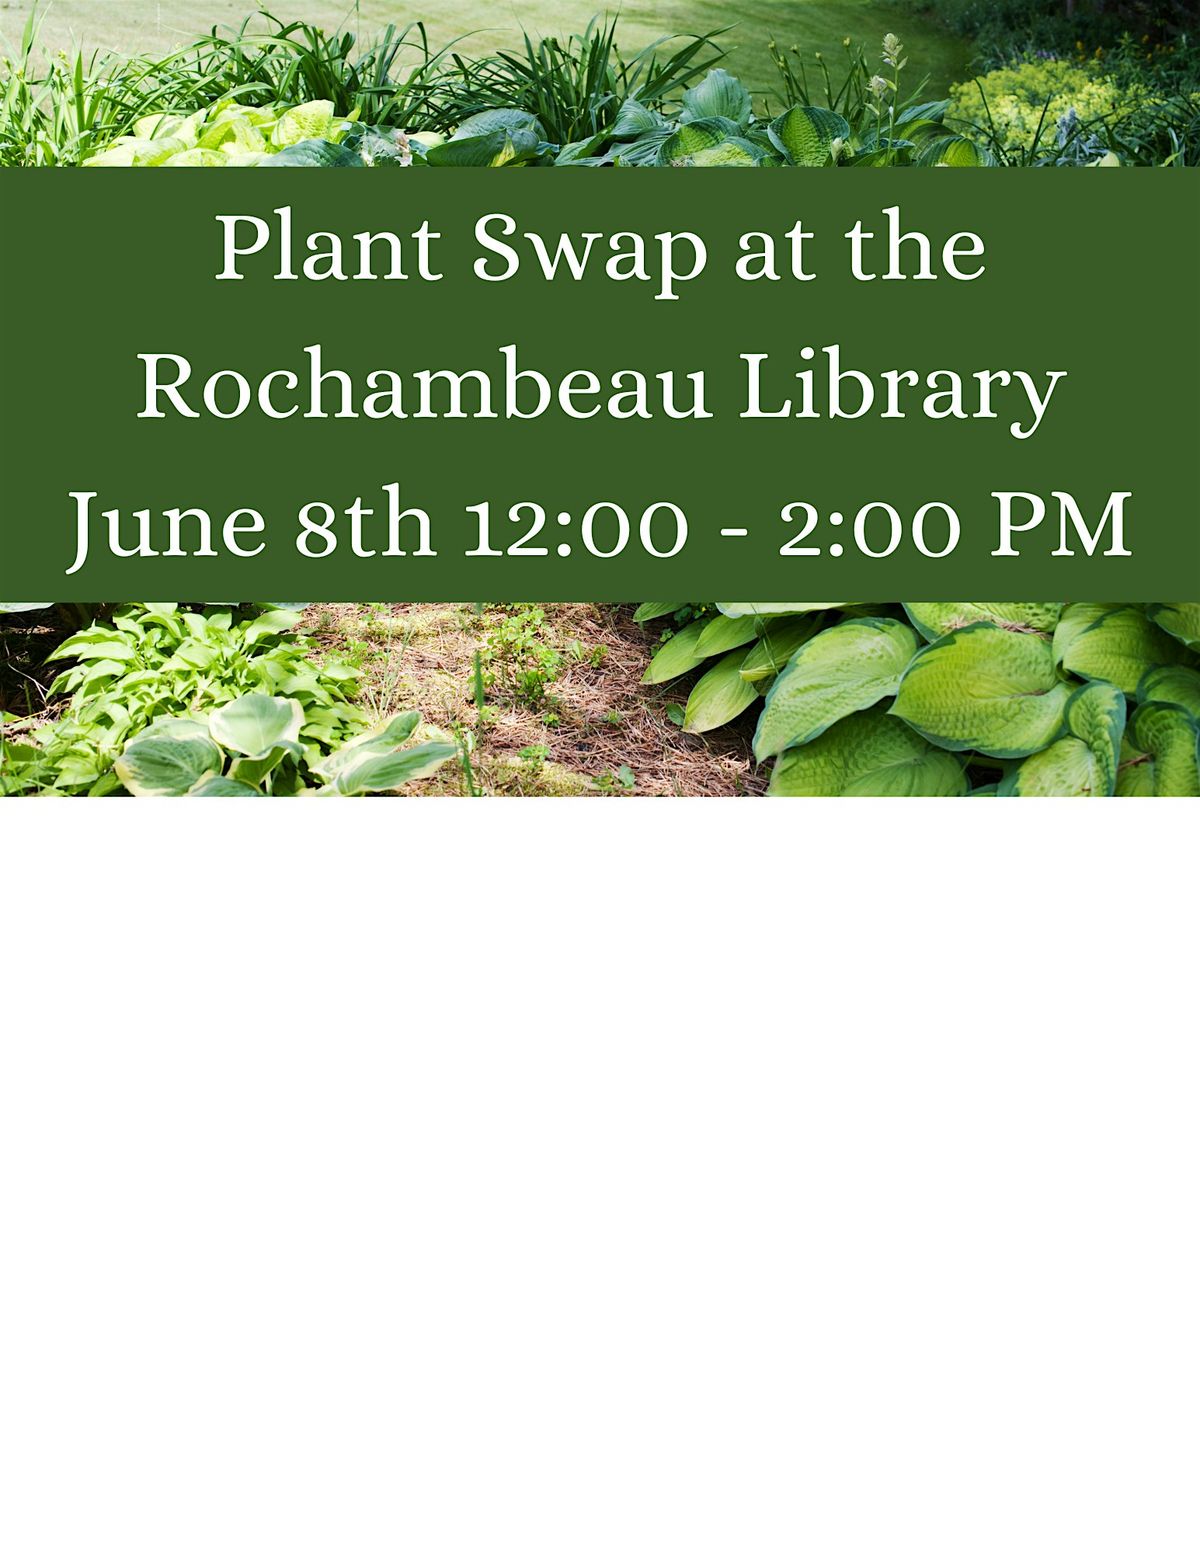 Plant Swap at the Rochambeau Library